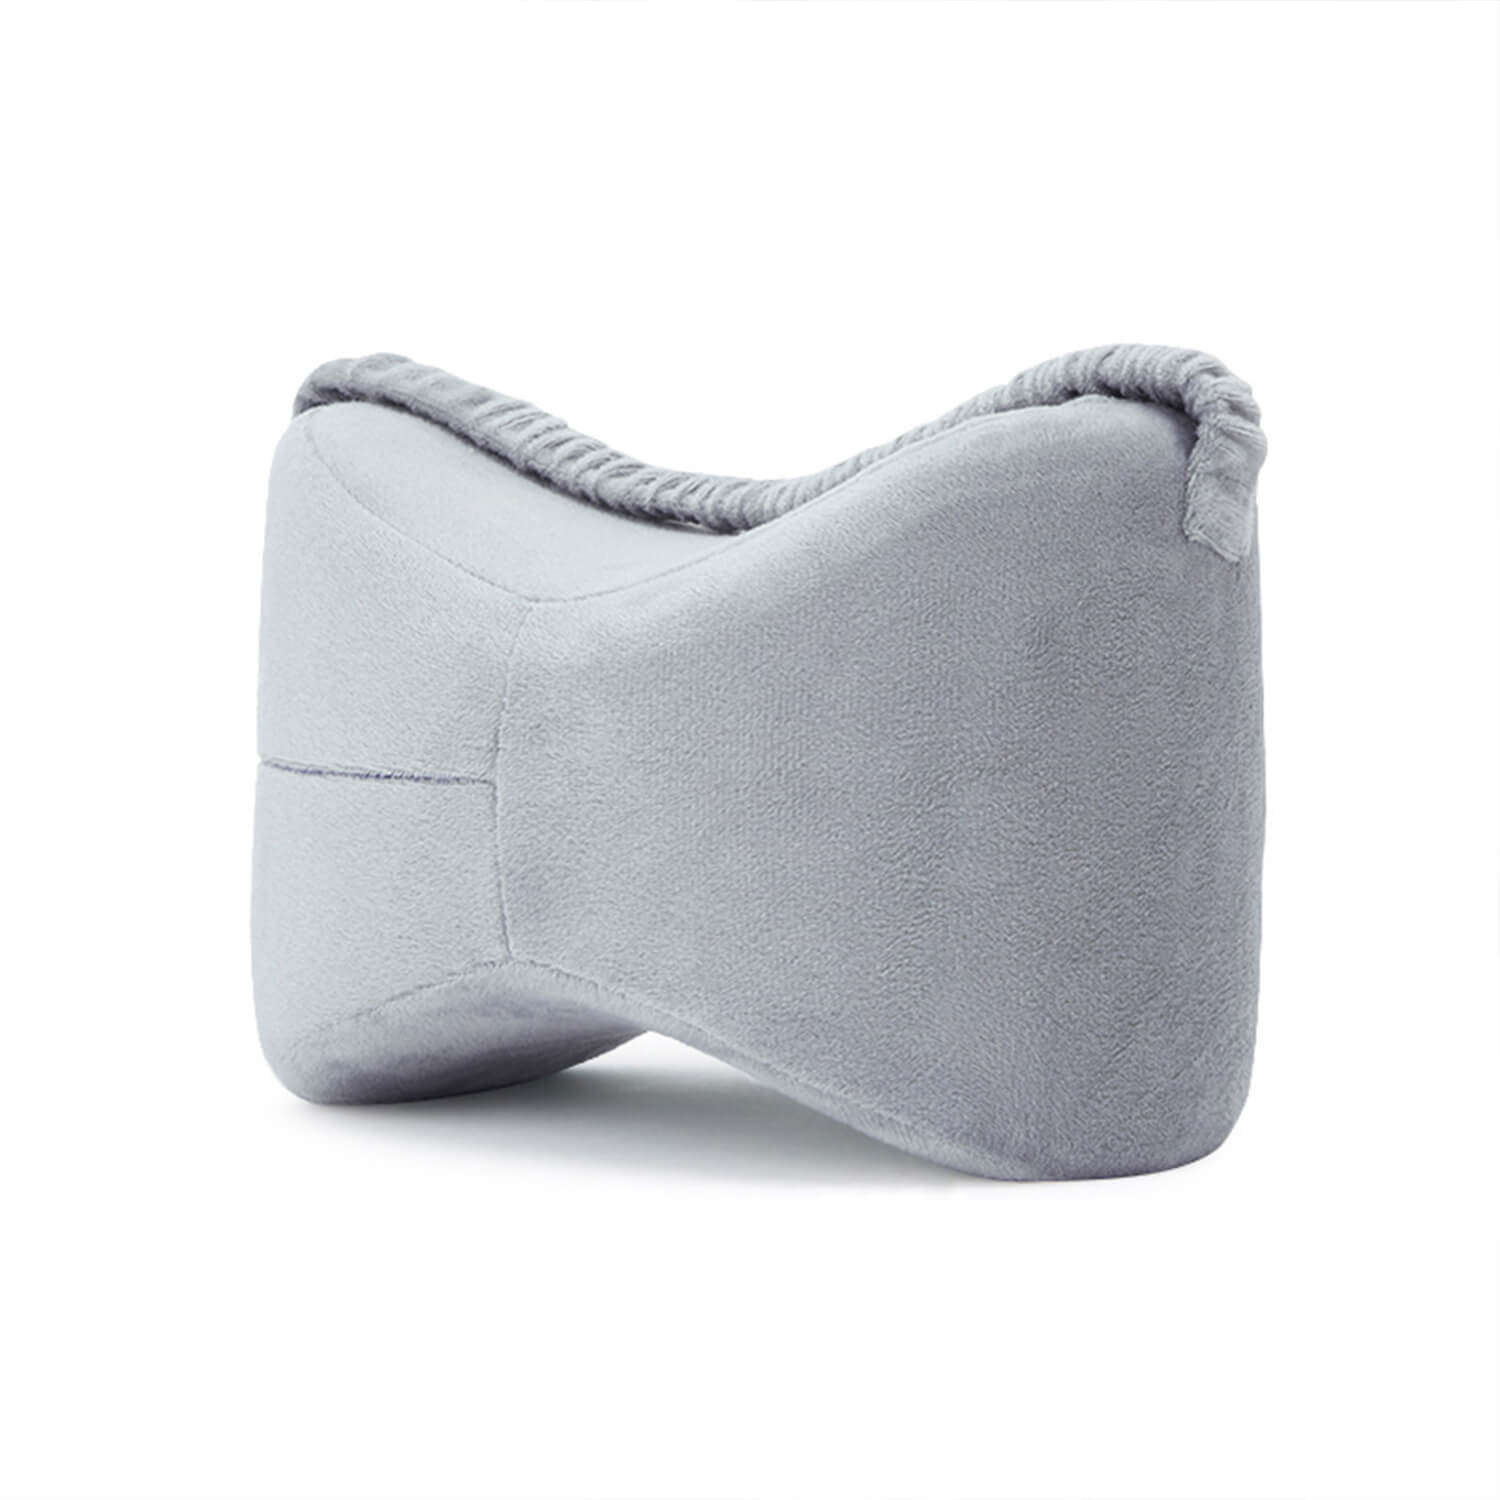 Everlasting Comfort Knee Pillow for Sleeping, Prevents Knee Clashing, Hip,  Lower Back, Leg, and Sciatic Nerve Pain Relief Pillows for Side Sleepers